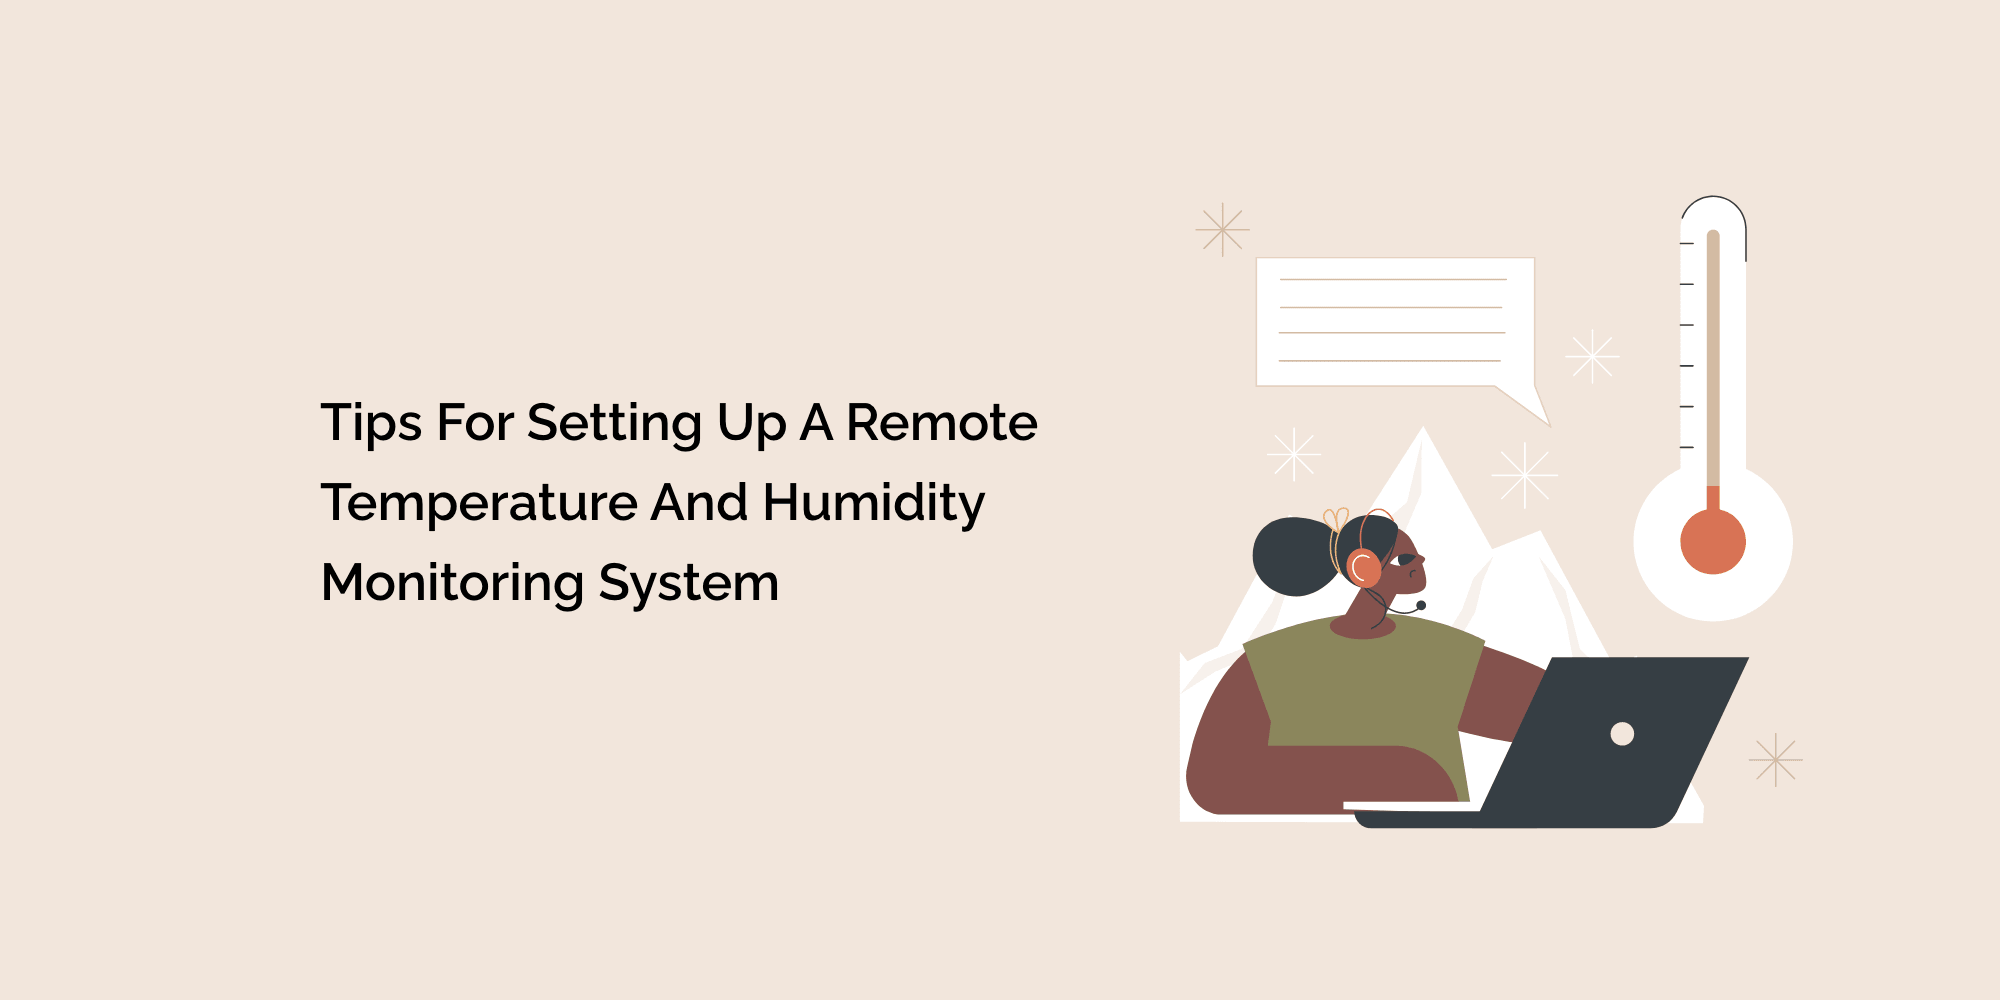 Tips for Setting Up a Remote Temperature and Humidity Monitoring System